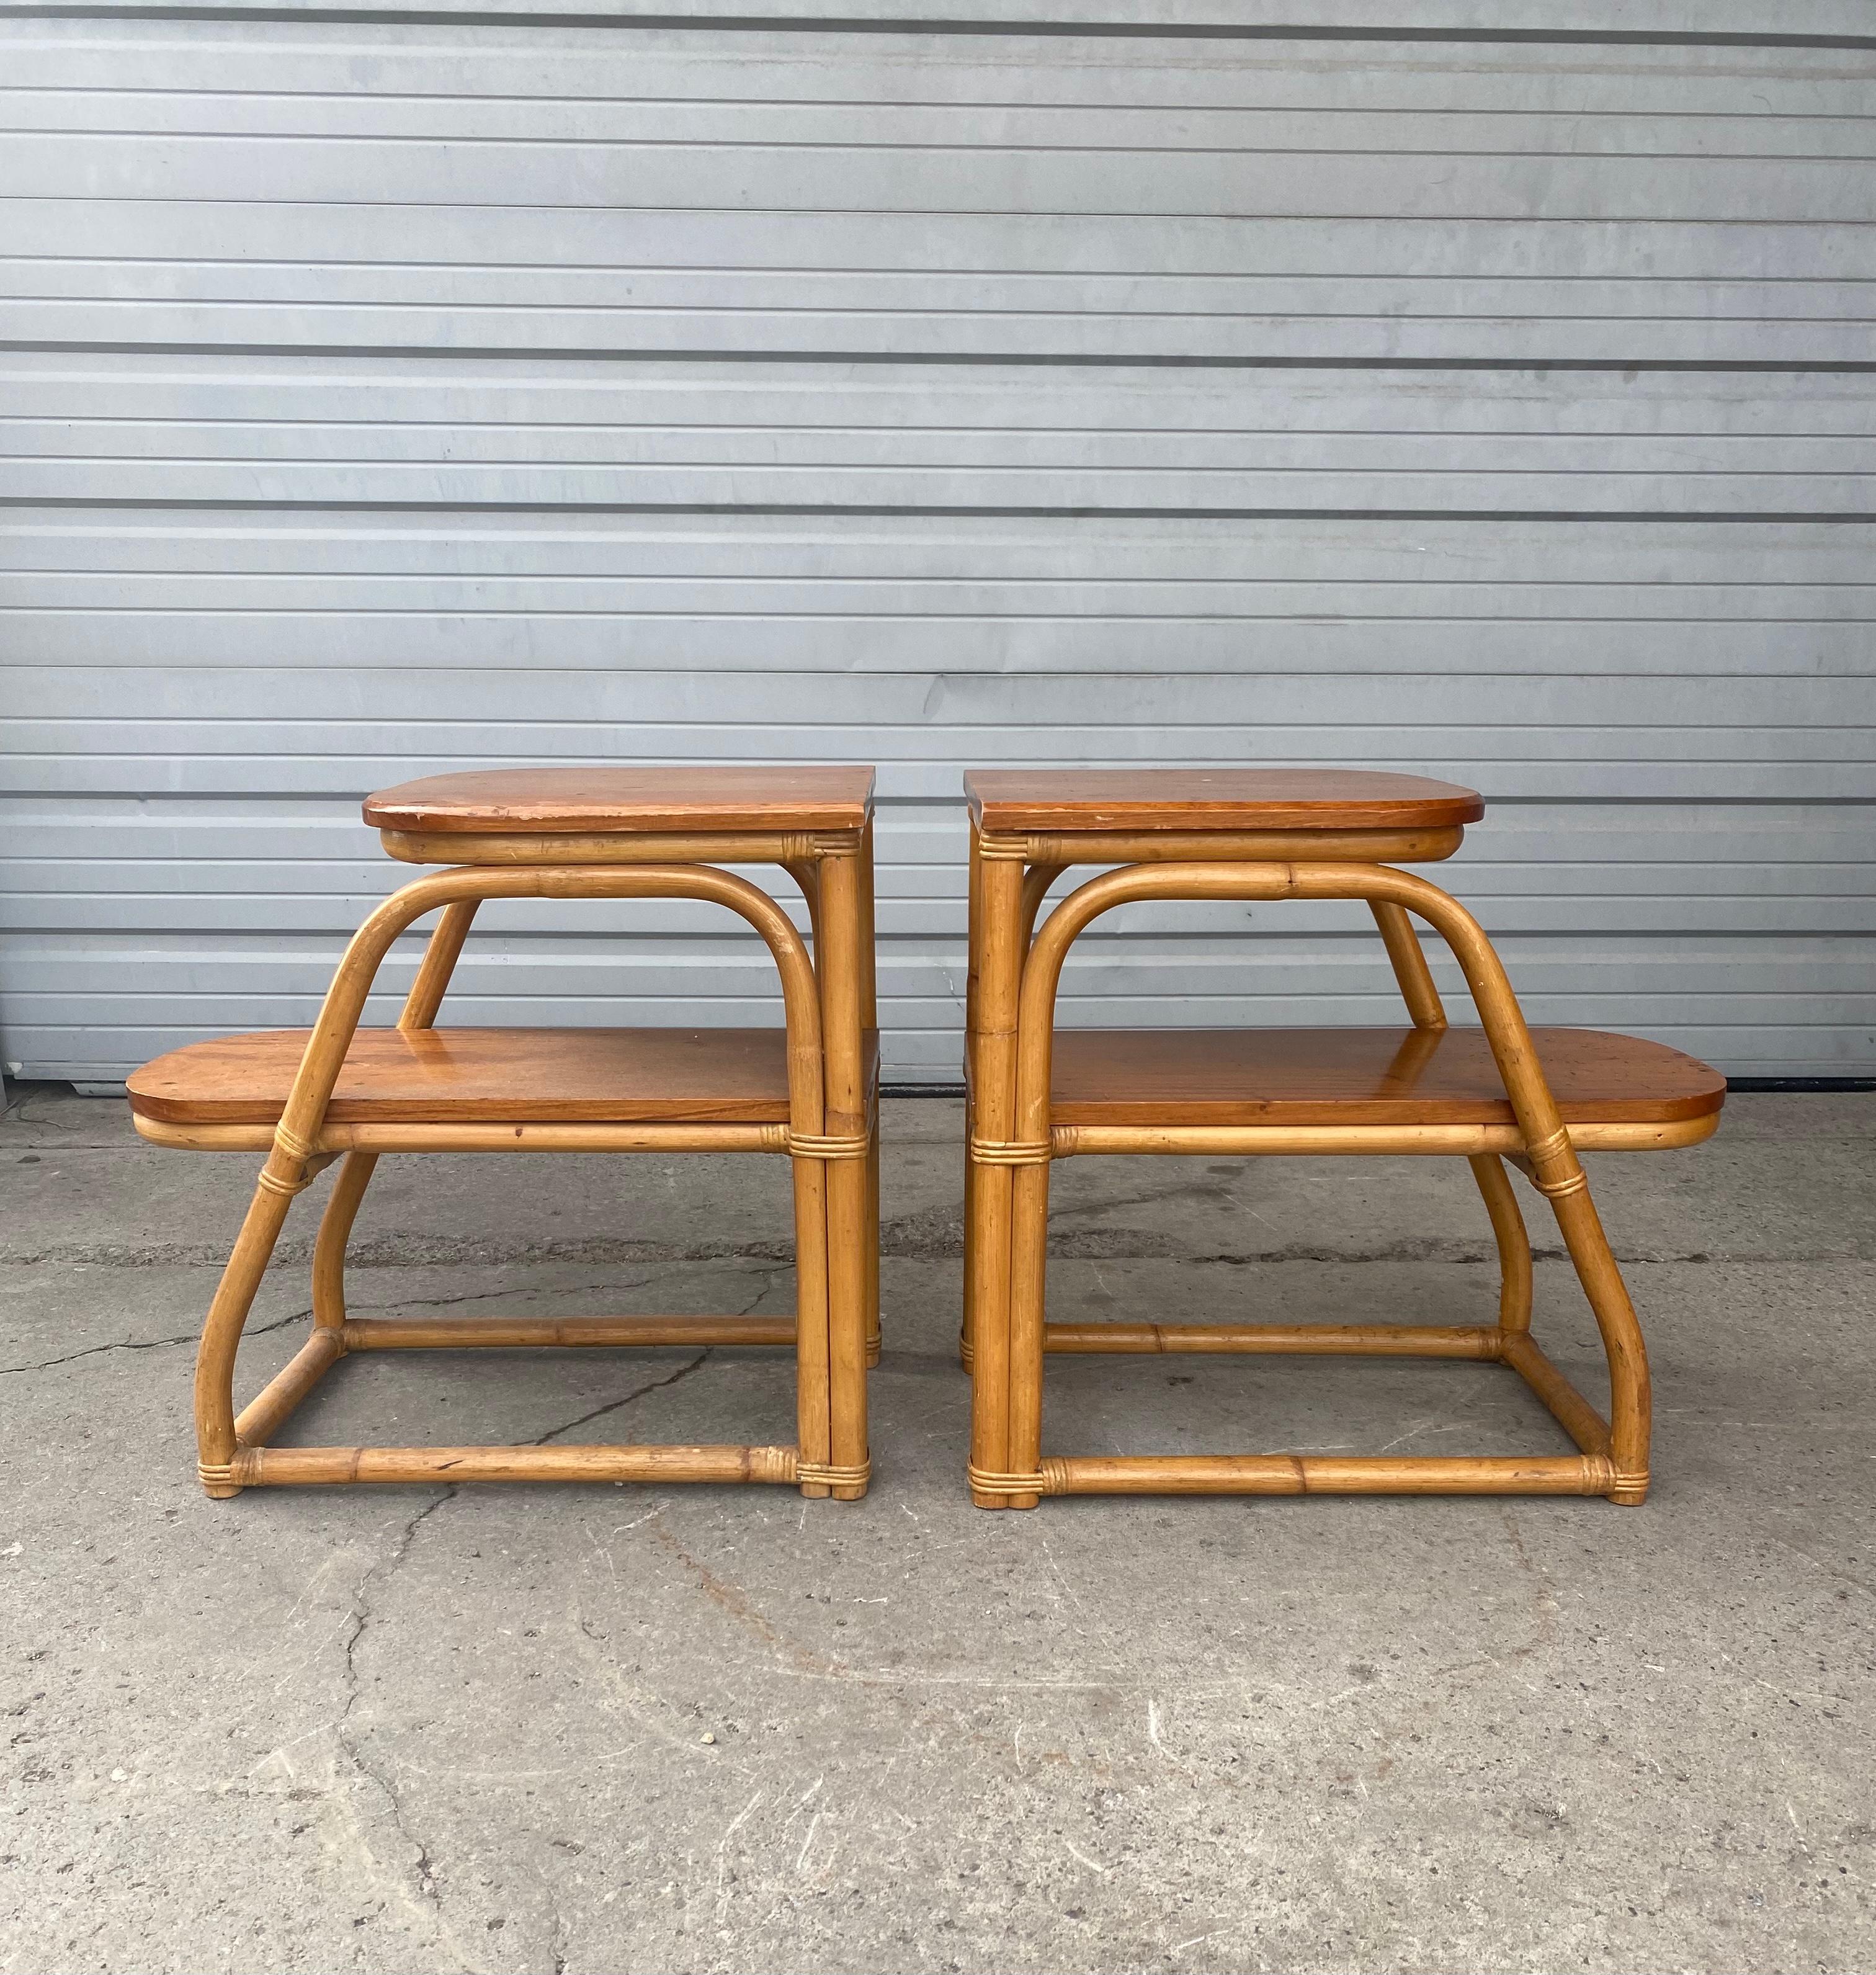 Mid-20th Century Pair Art Deco / Modernist Bamboo Step End Tables by Rattan Art, Philippines For Sale